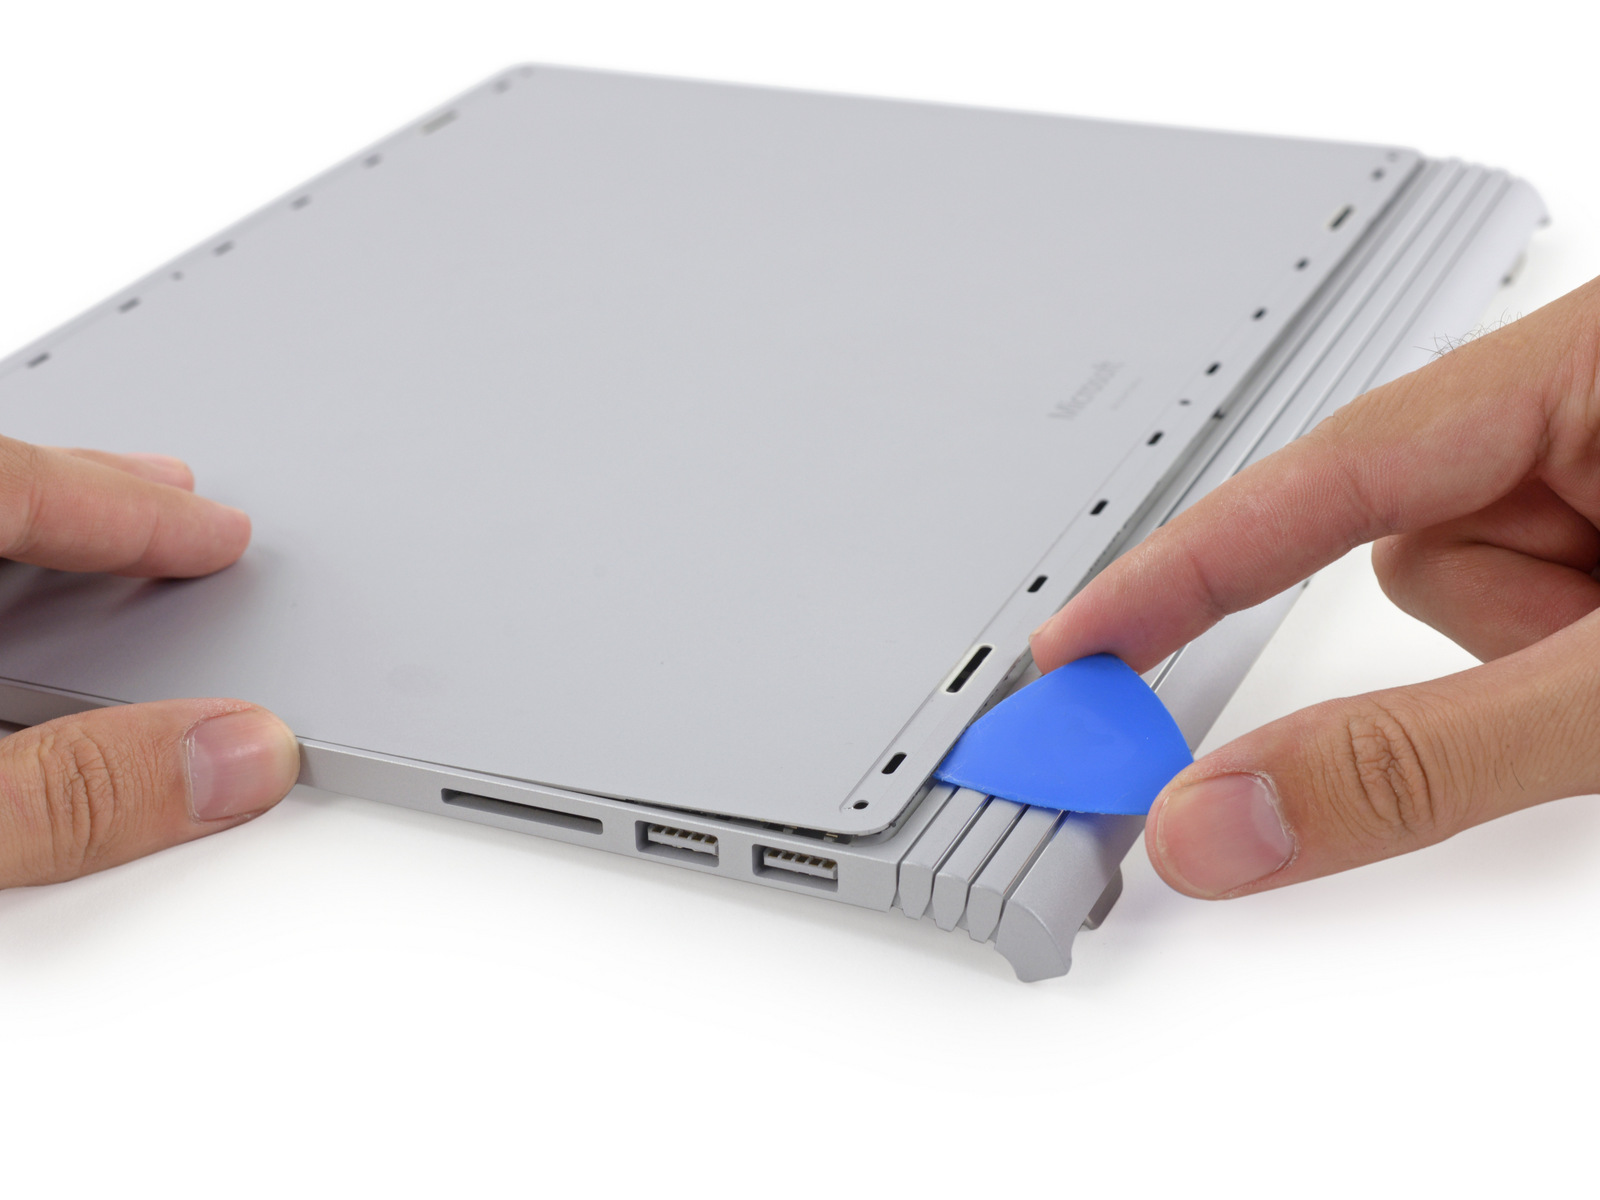 iFixit Tears Down Microsoft’s Surface Book, Finds A ... - 1600 x 1200 jpeg 201kB